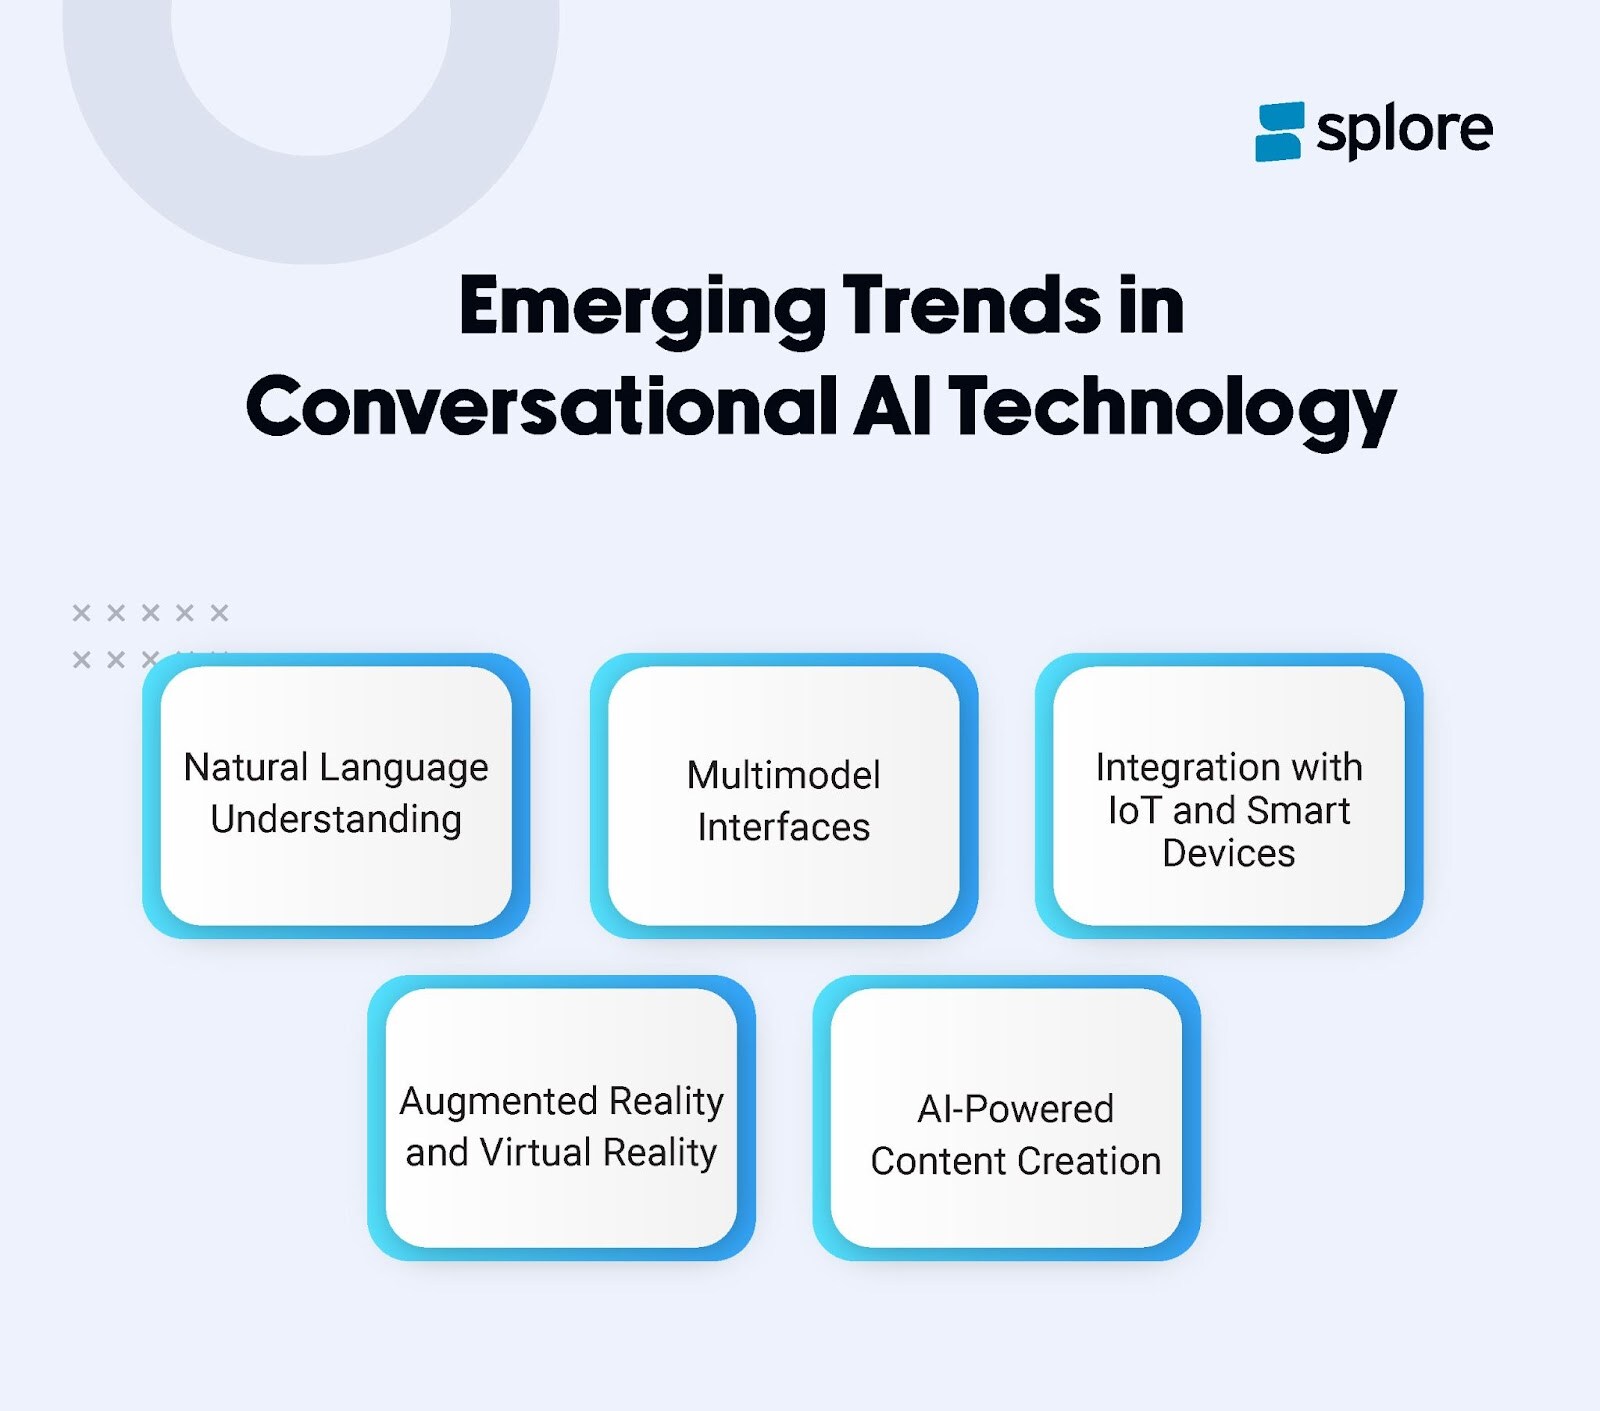 Emerging Trends in Conversational AI Technology